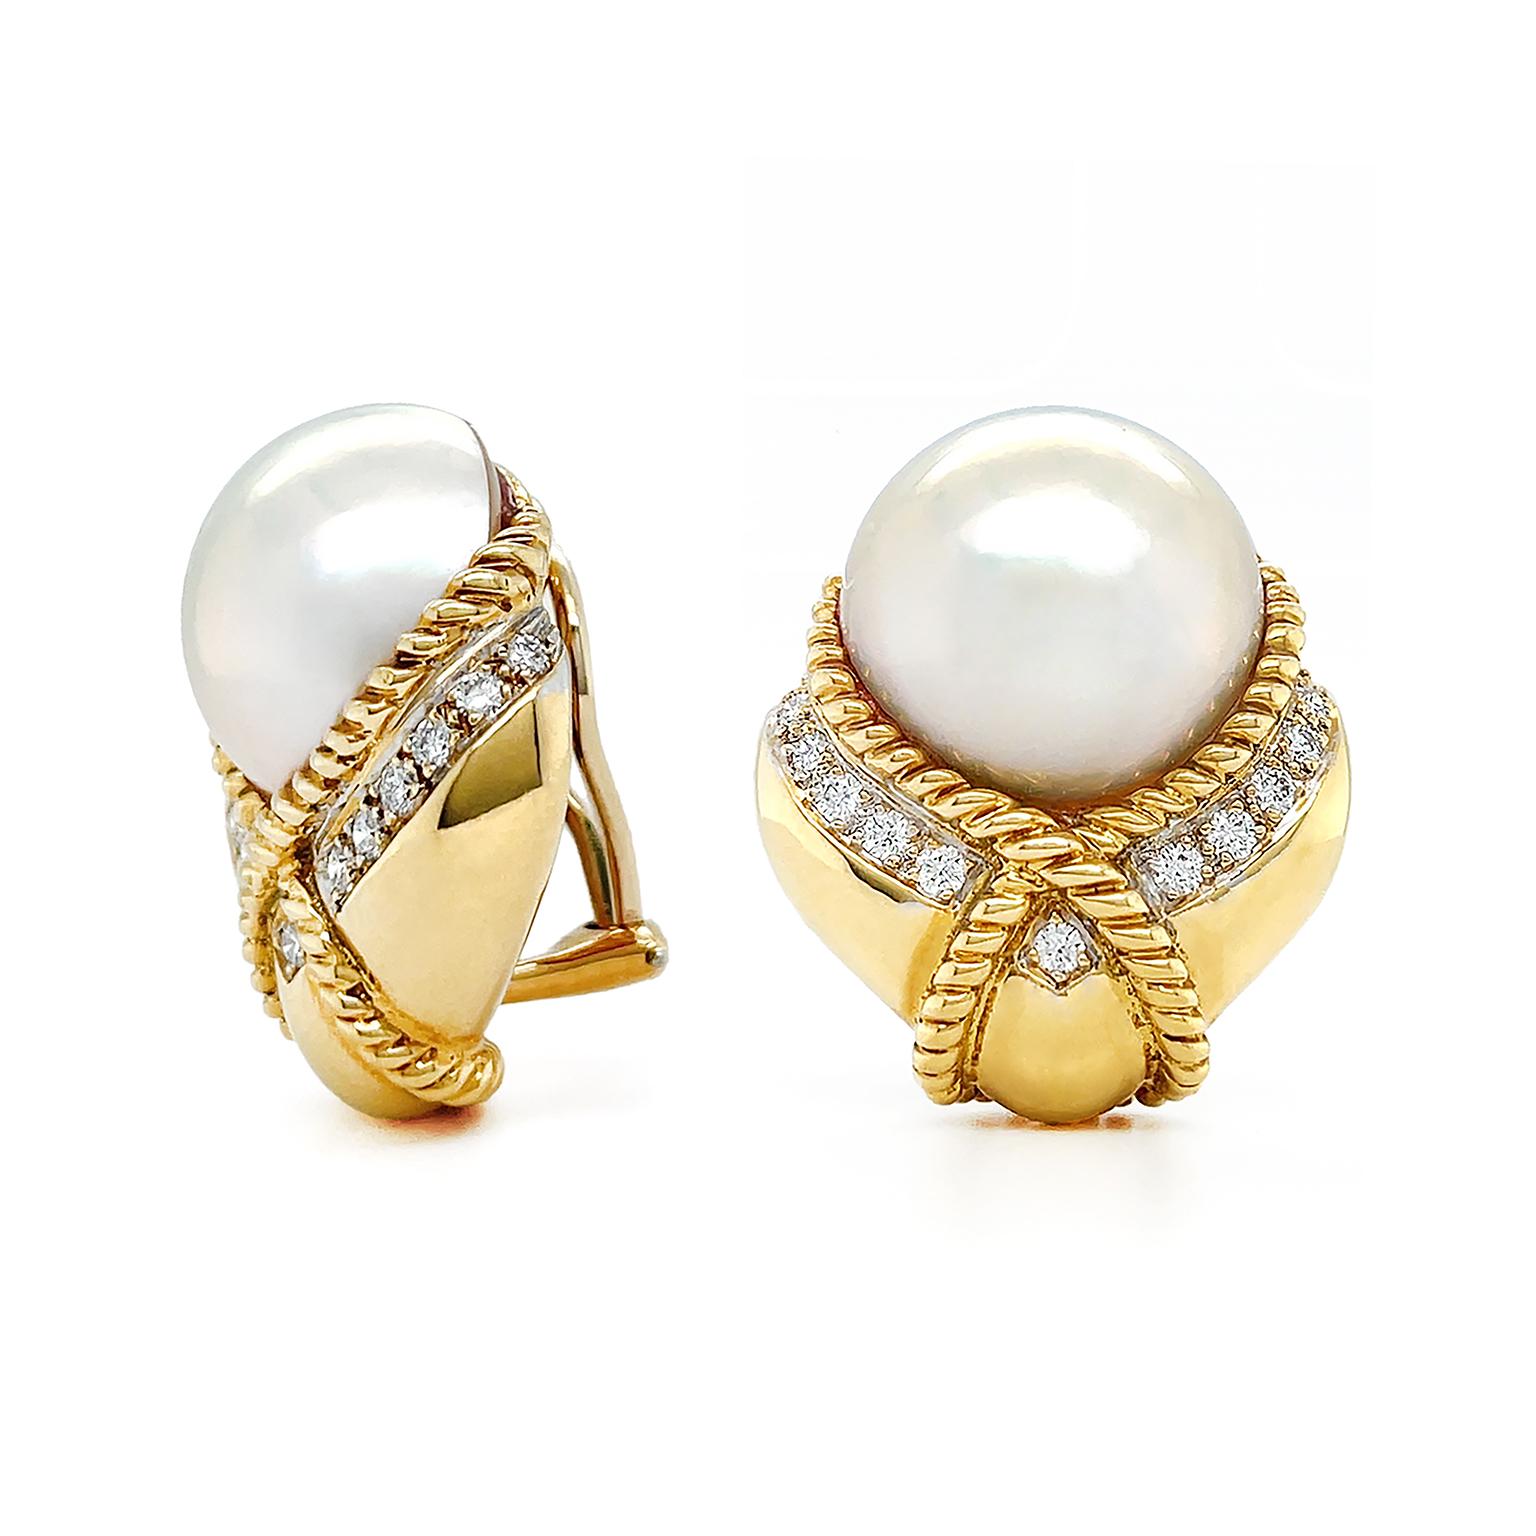 Sleek tapering 18k yellow gold is enriched by brilliant cut diamonds as the foundation of these earrings. A single mabe pearl, reflecting a luminous array of soft purple, green and blue hues, sits in the center. Embracing the edge of the pearl is a